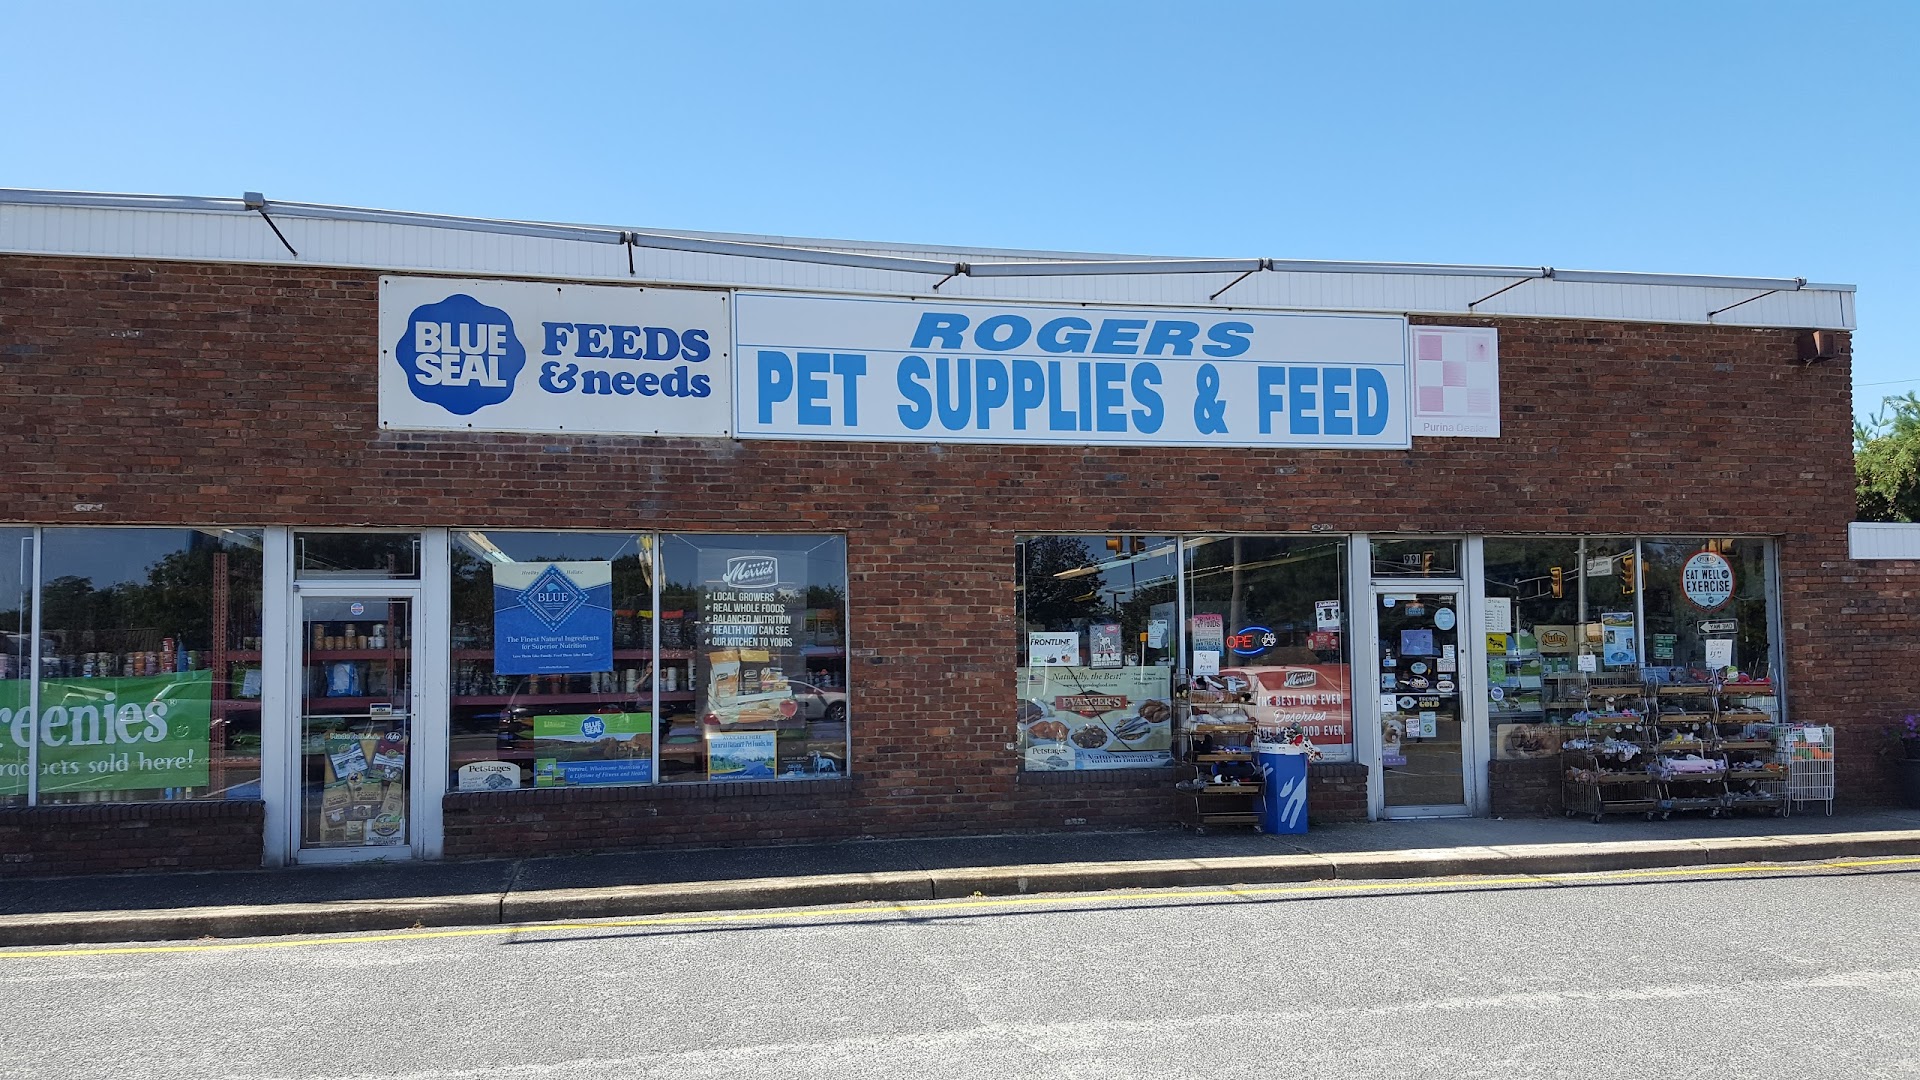 Roger's Pet Supplies & Feed